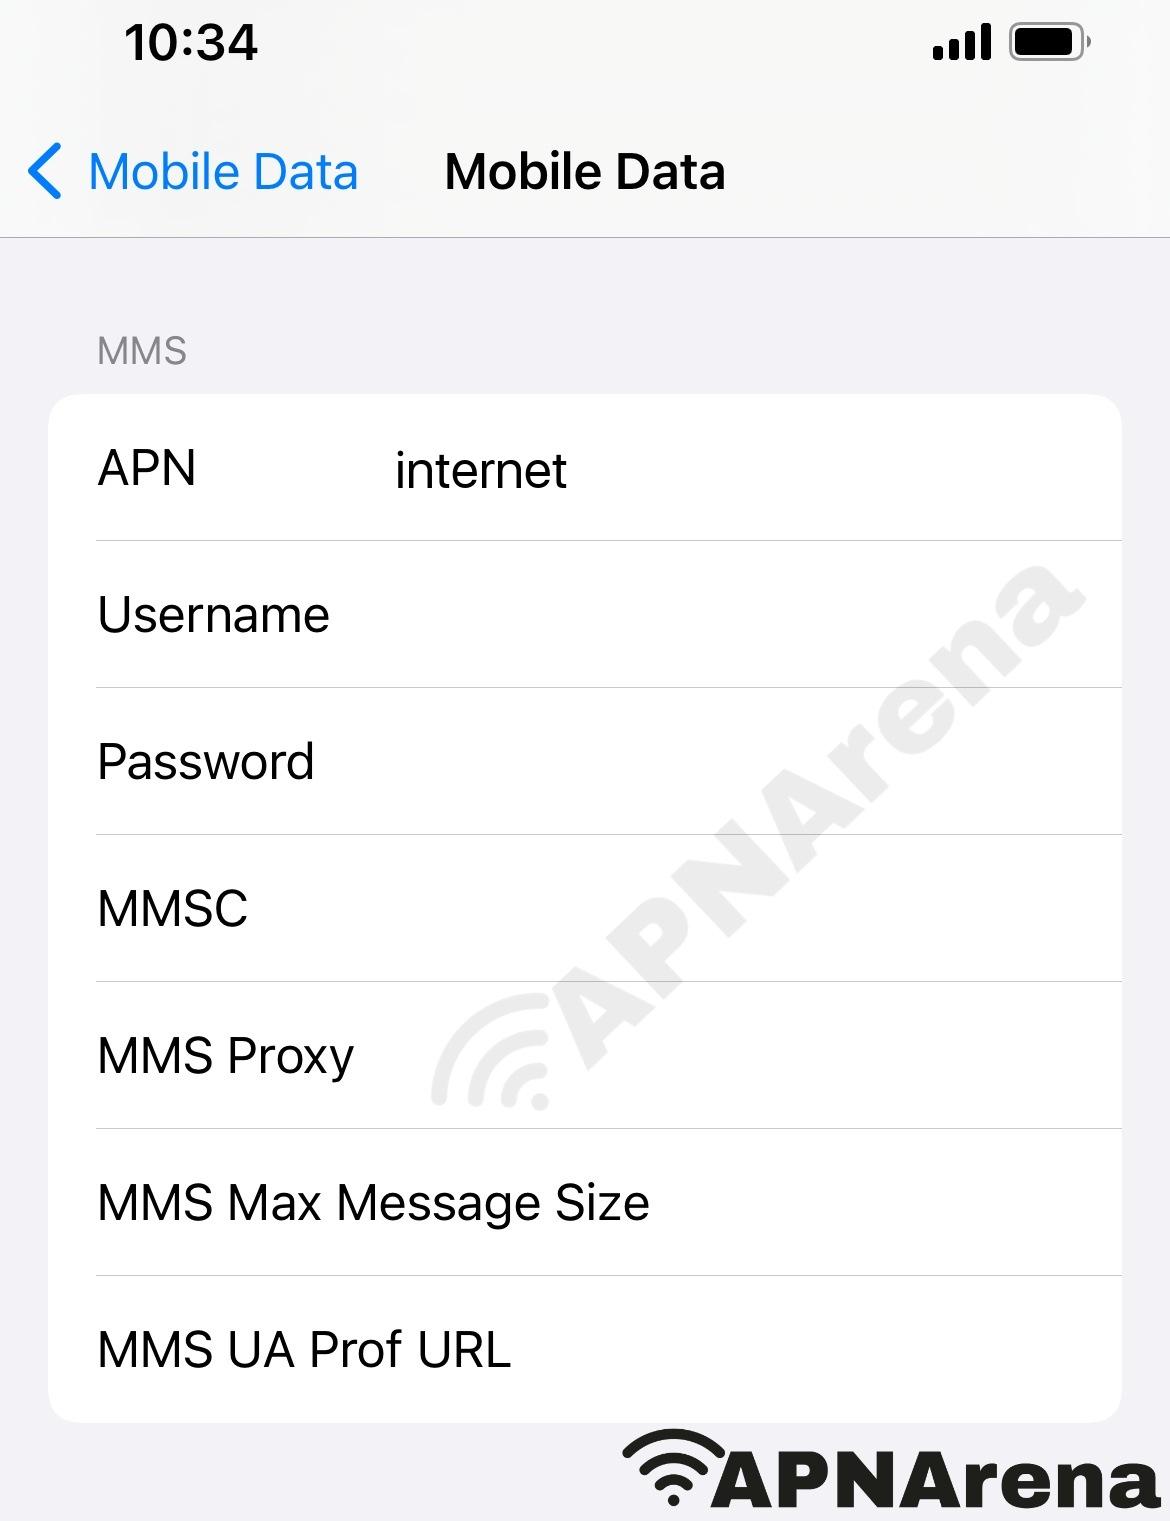 TN Mobile (Cell One, Leo) MMS Settings for iPhone